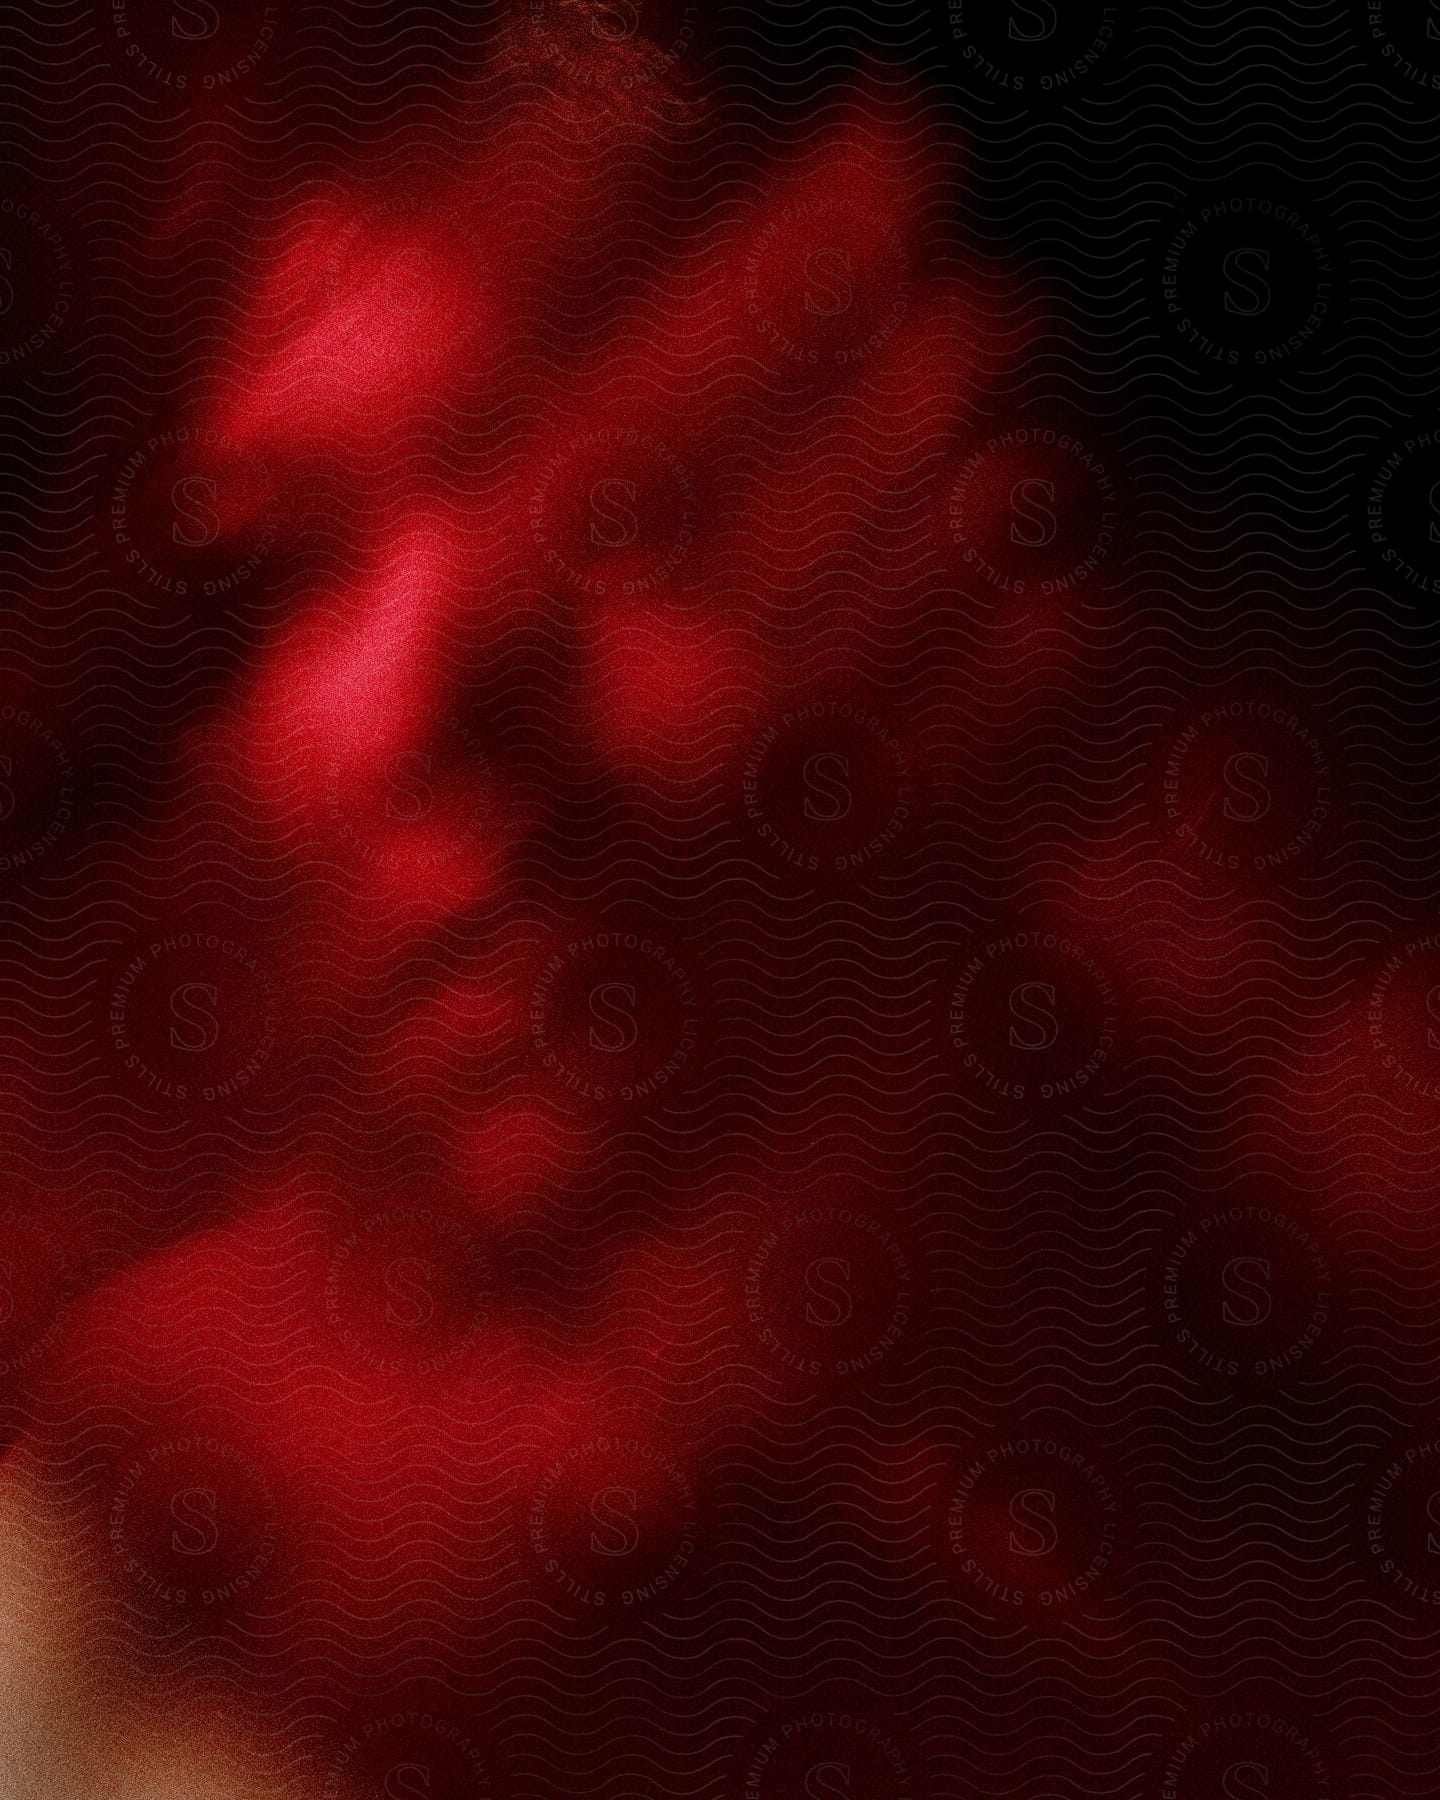 A womans face is barely visible through a red cover barely casting light